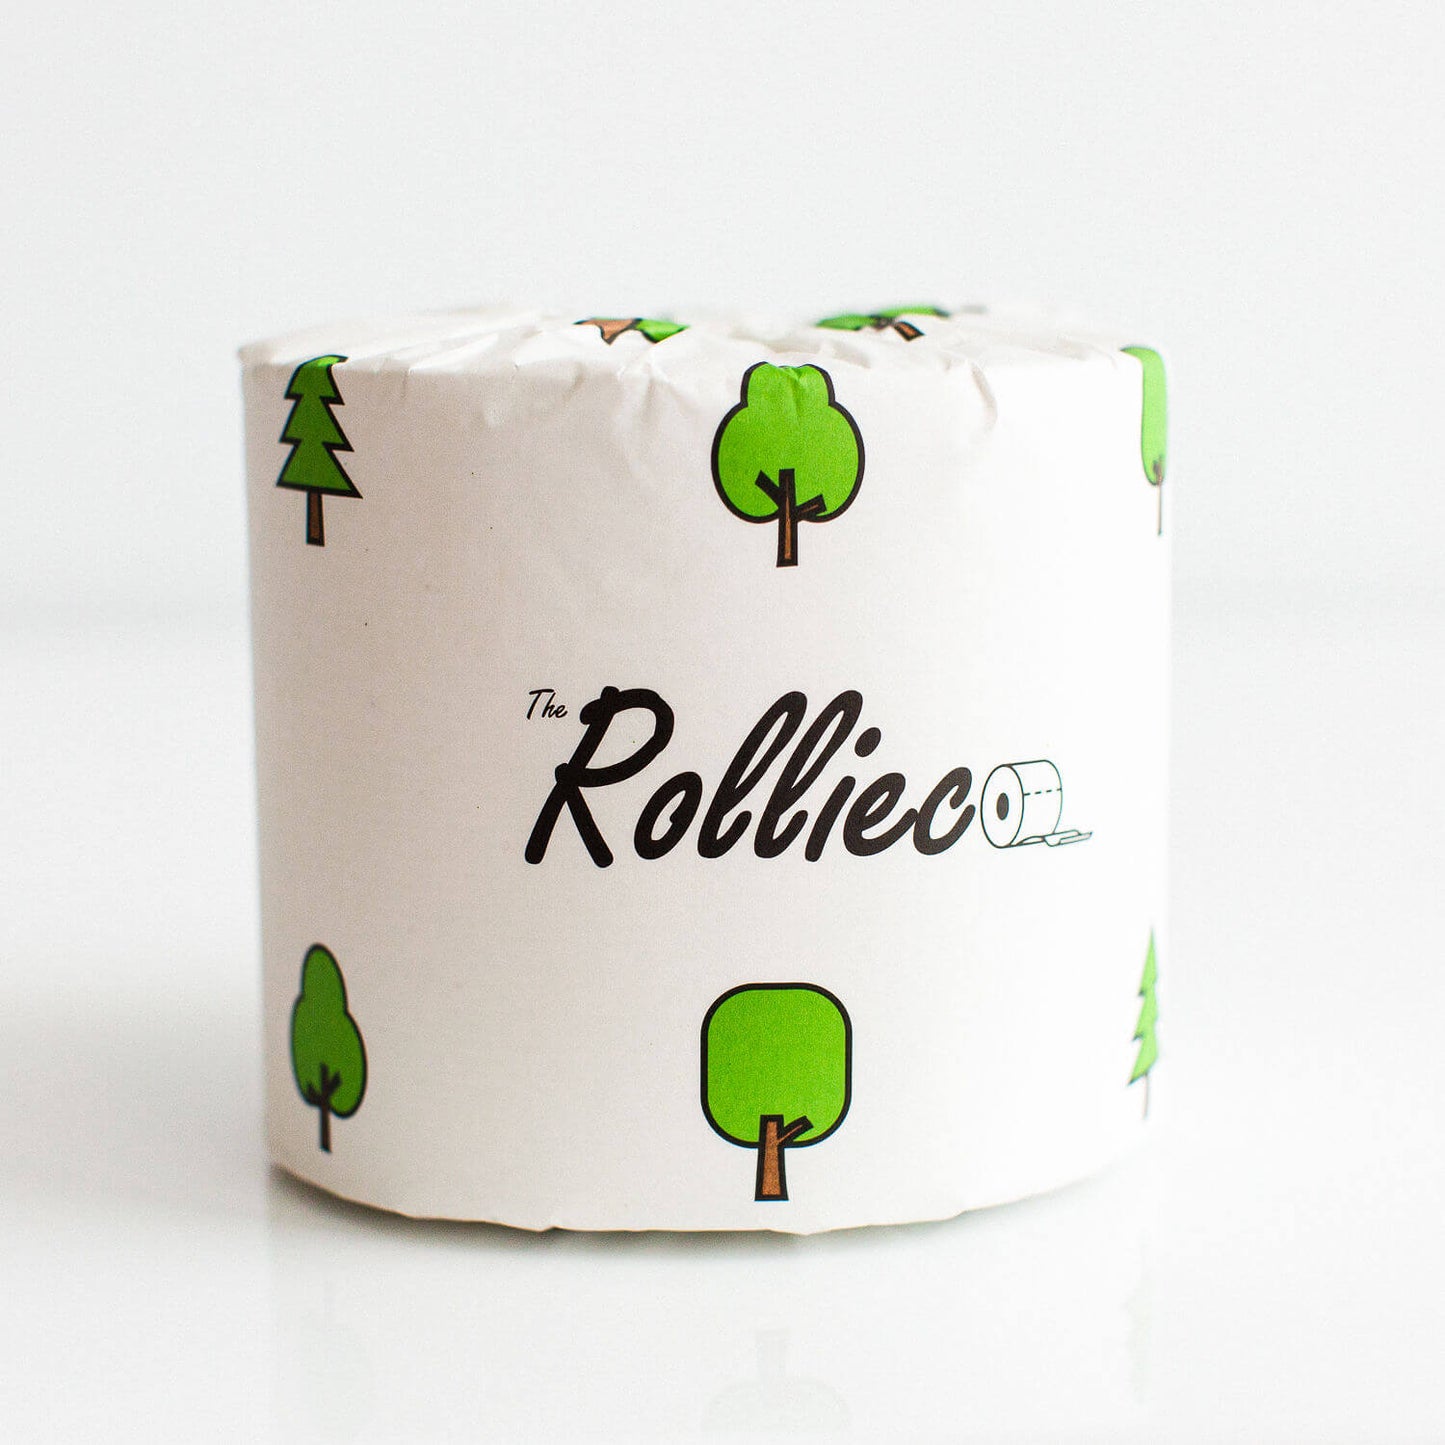 a roll of individually paper wrapped eco toilet paper branded The Rollieco. Wrapper is in white and cute trees design.